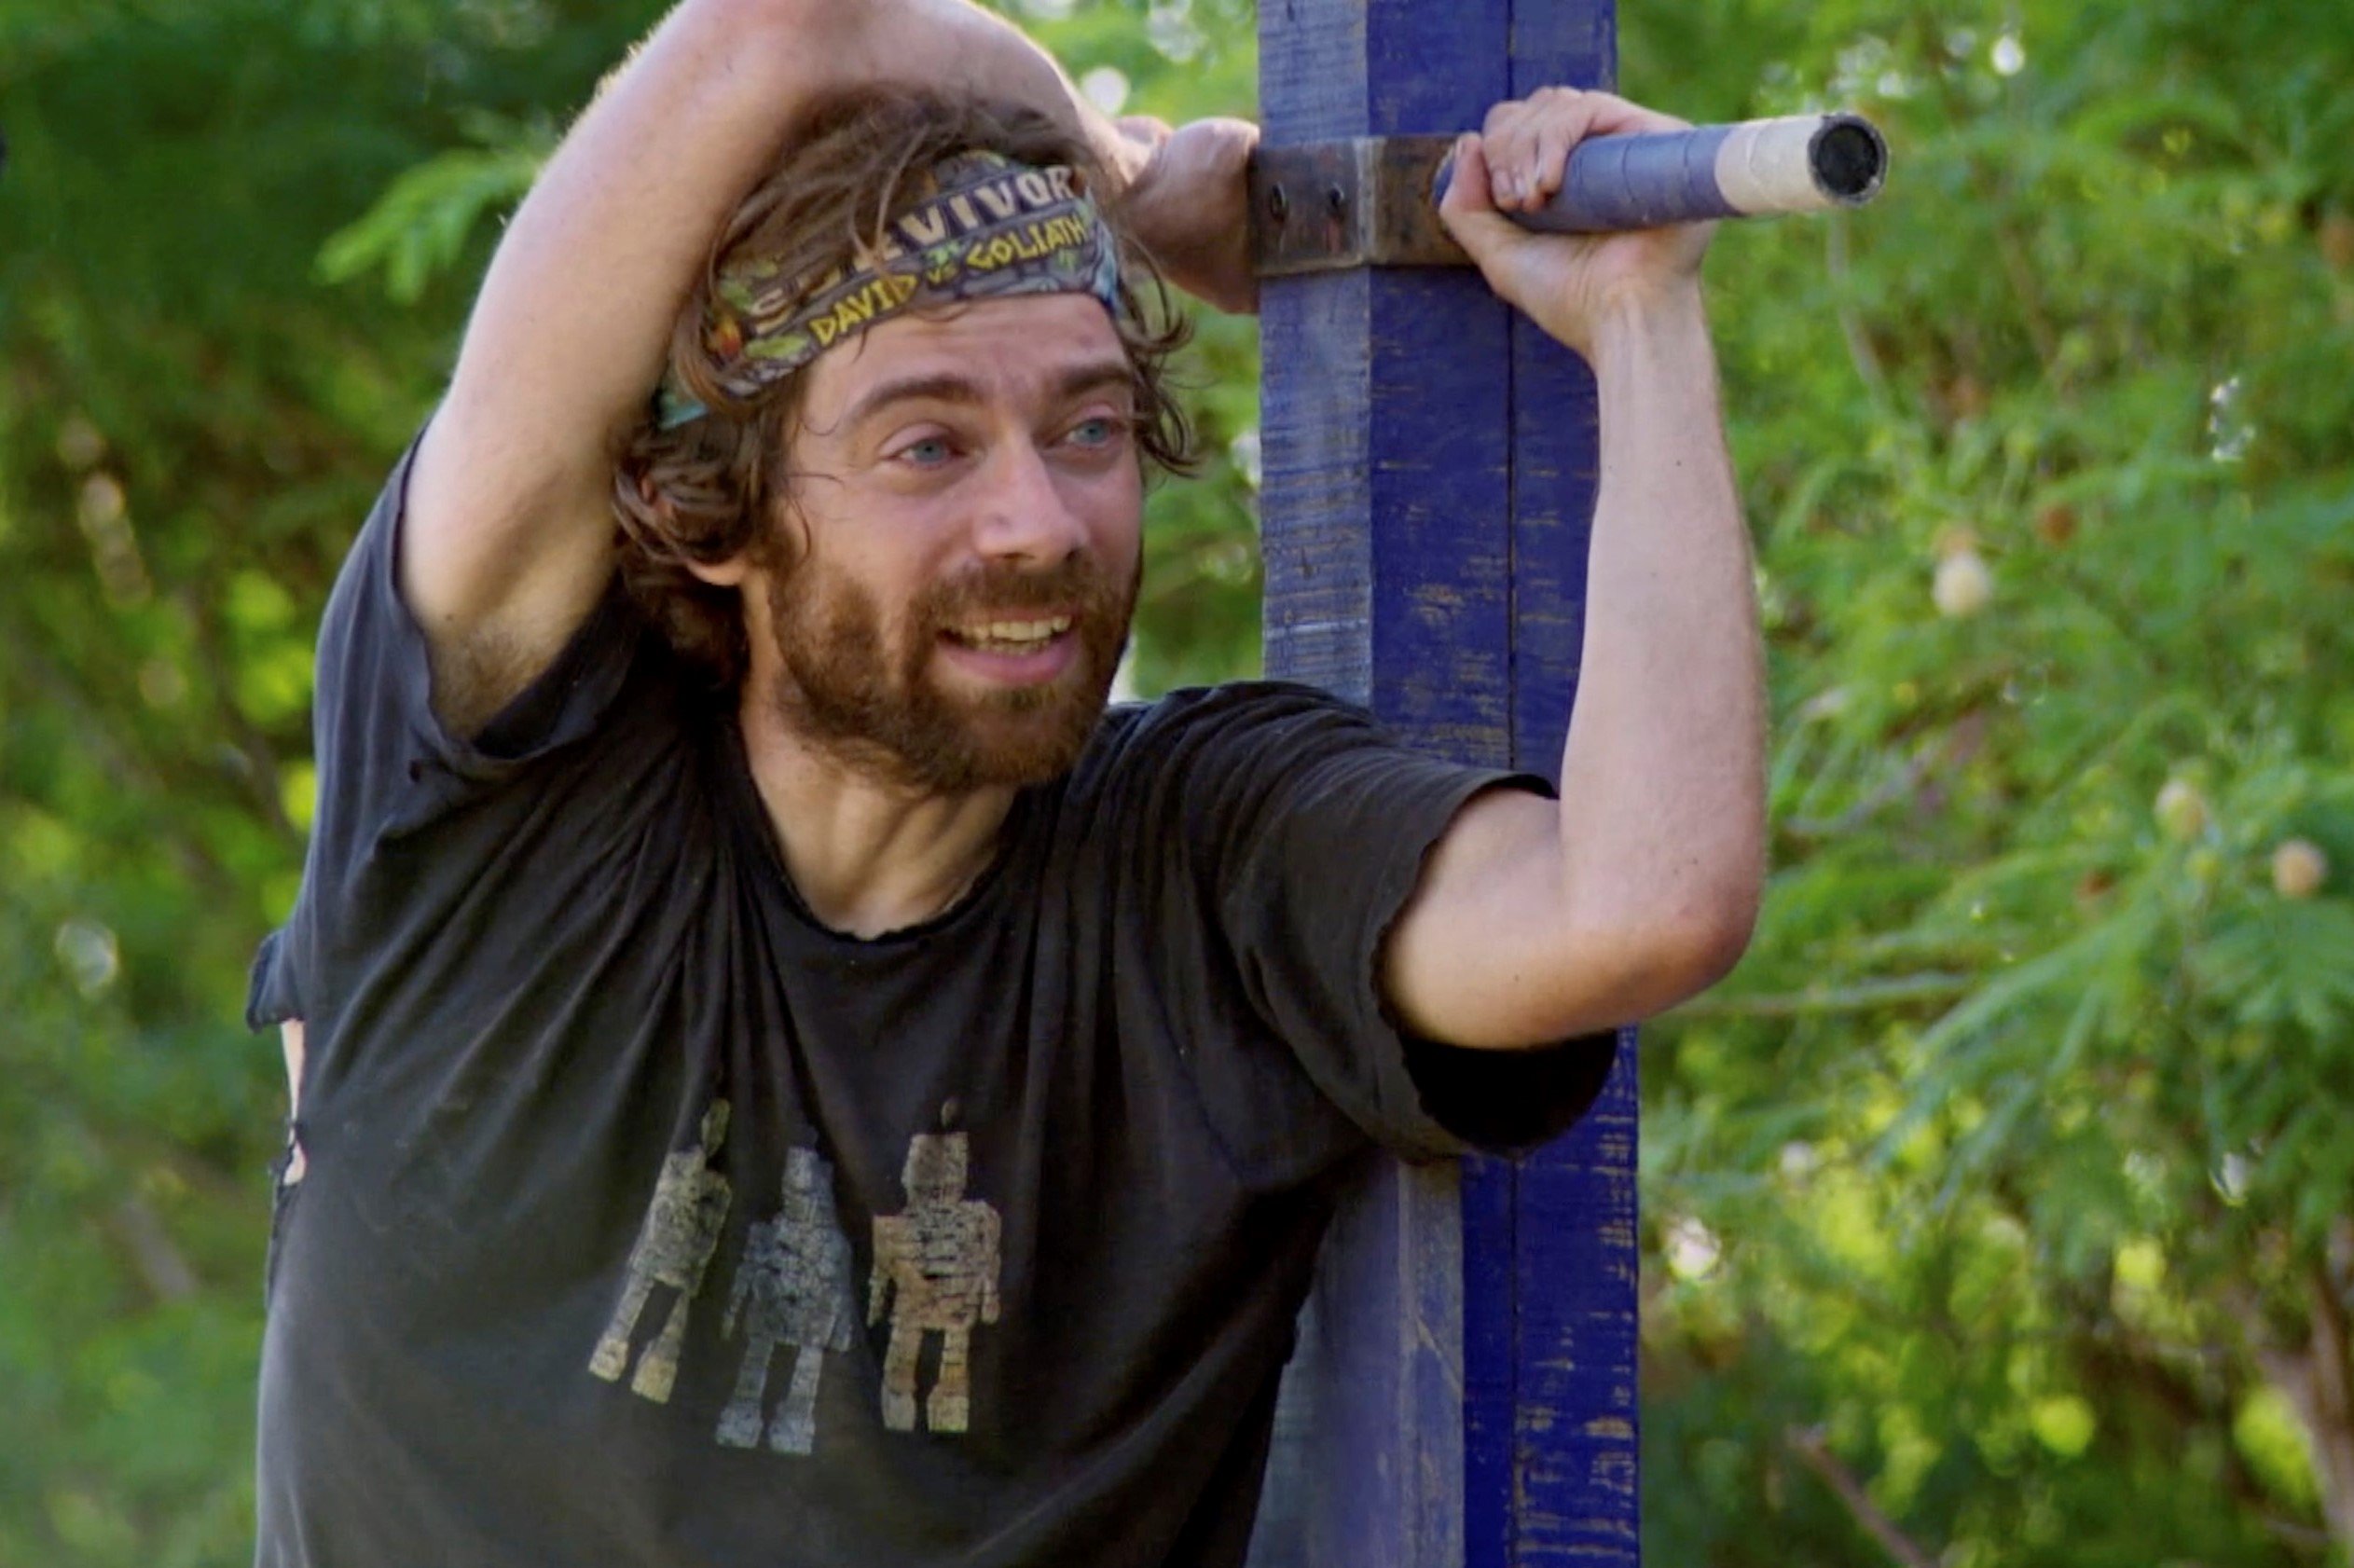 Christian Hubicki, who many fans want to see return to 'Survivor' in an All-Stars season, competes in an immunity challenge wearing a torn black shirt and his 'Survivor' buff.